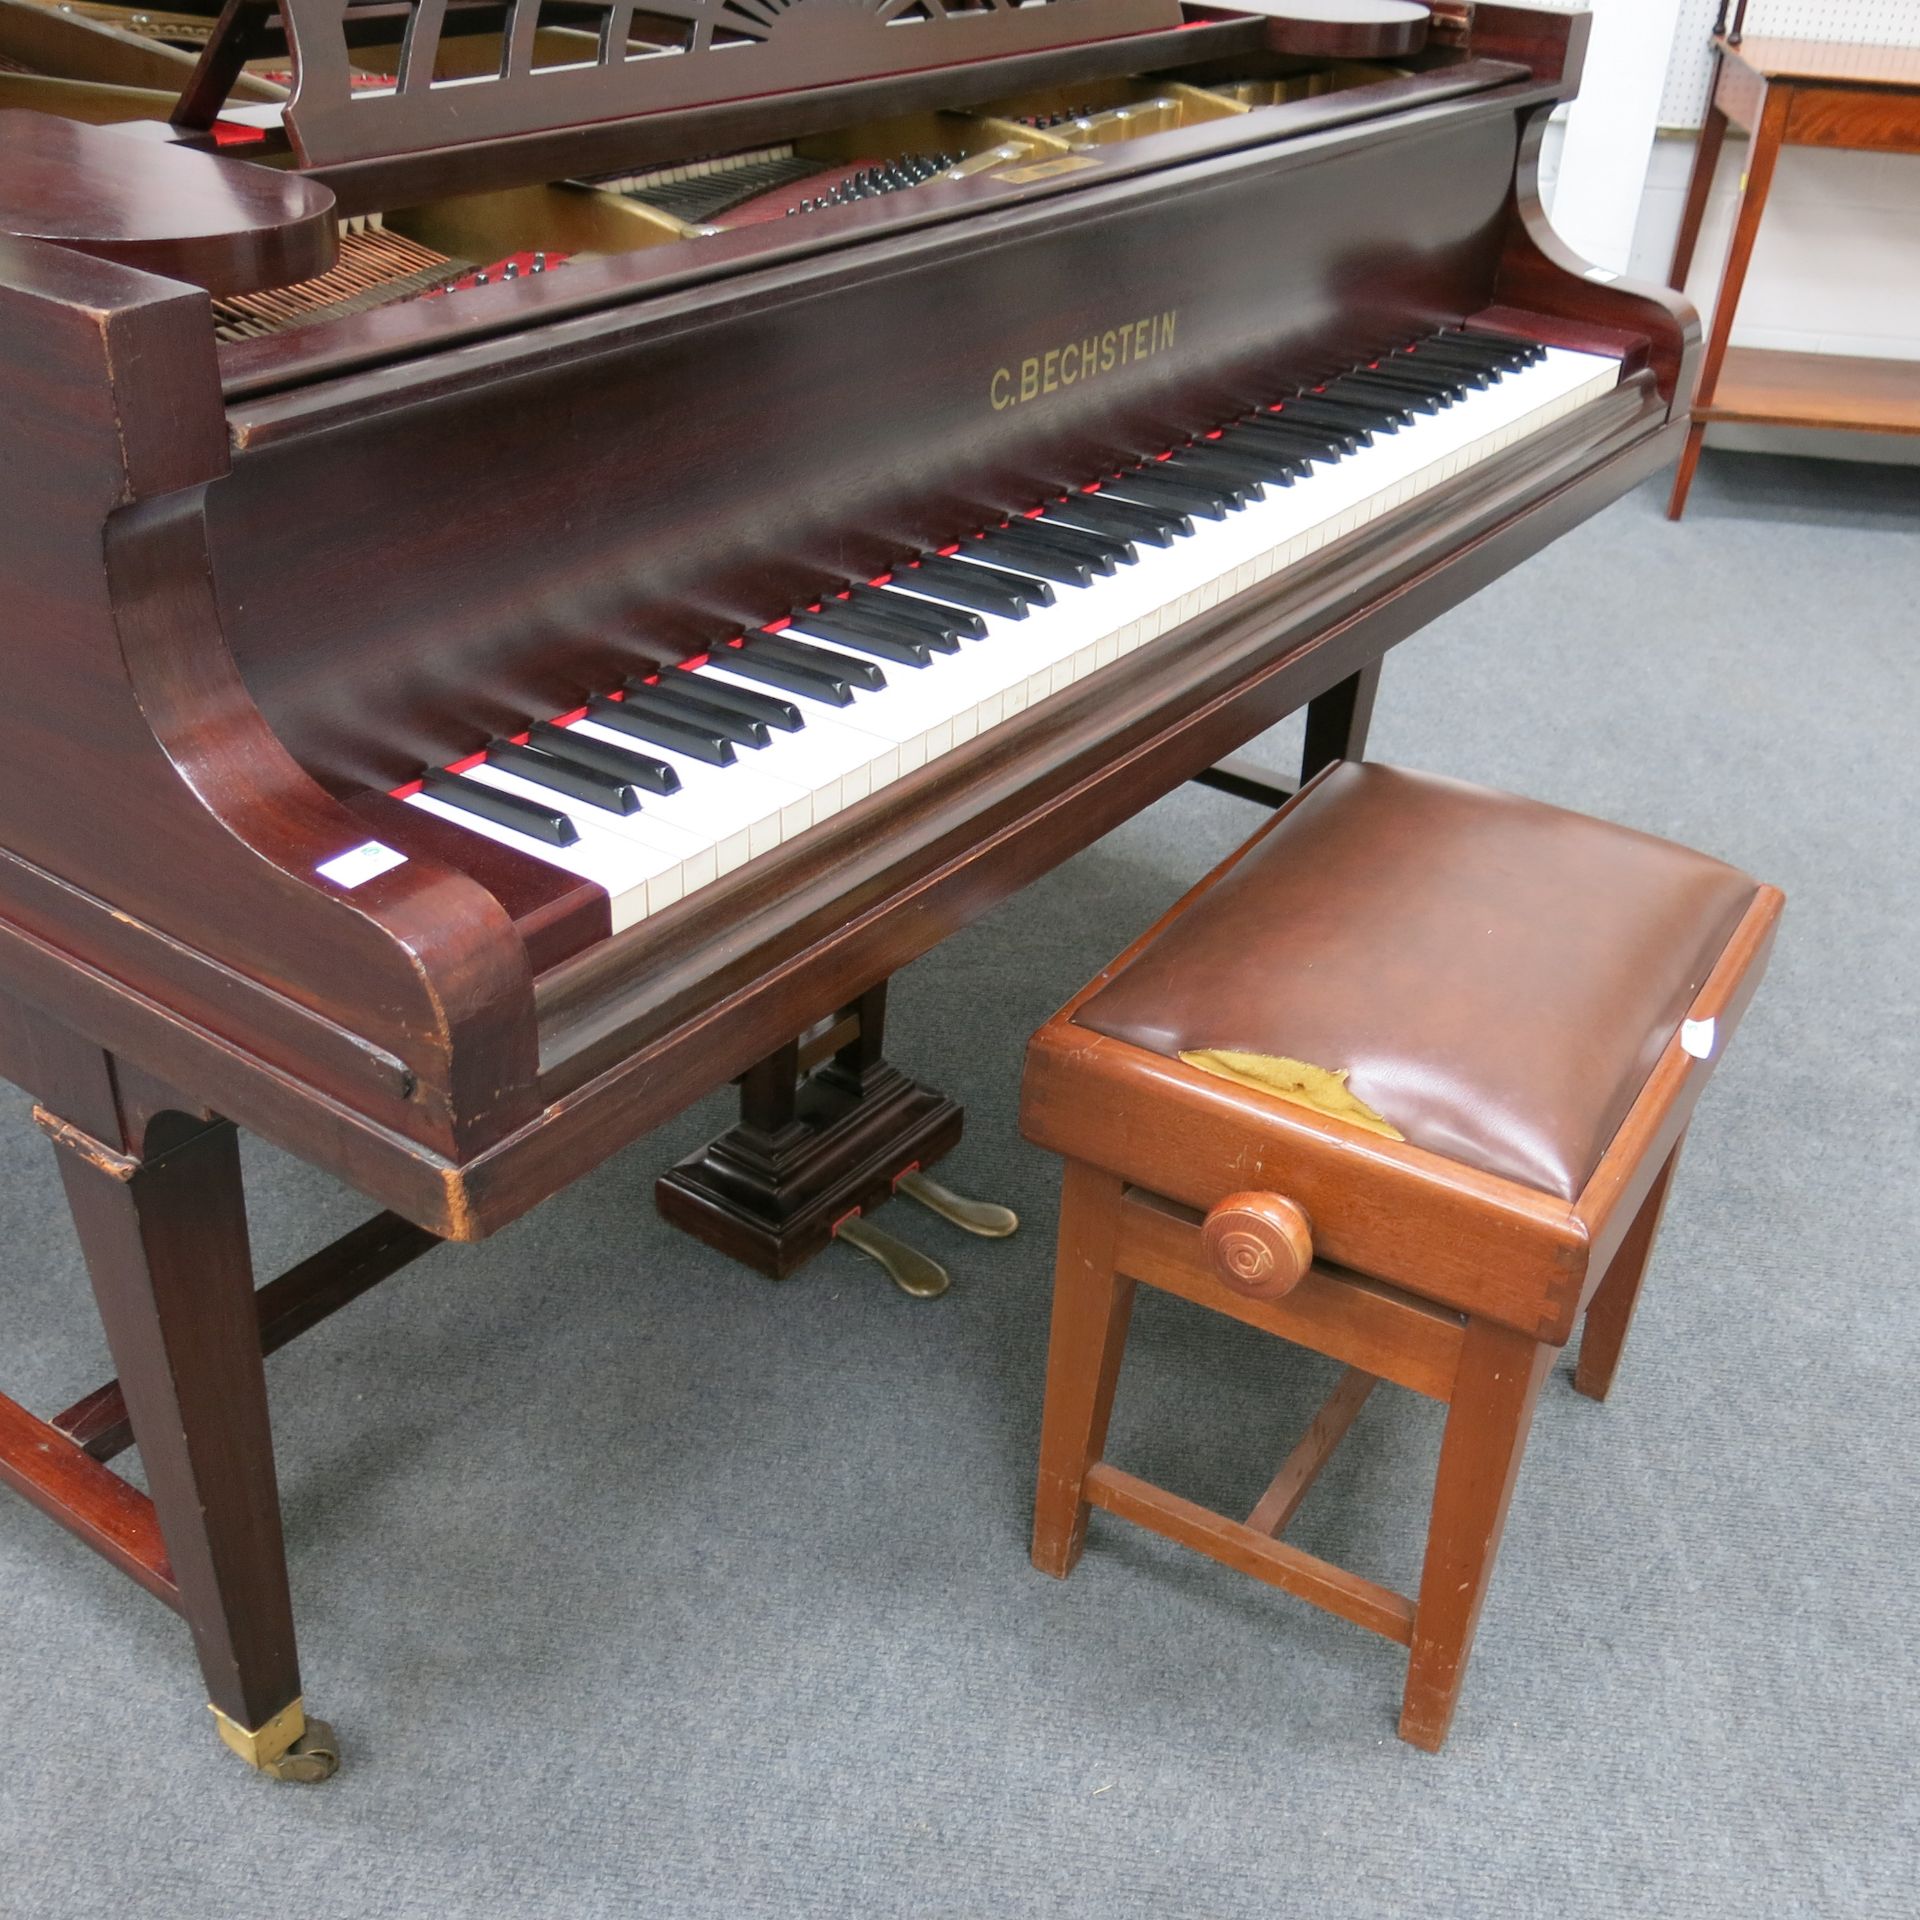 C. Bechstein Boudoir Grand Piano In Mahogany Case no 30143. The Cast Iron Frame Numbered 90951 (c. - Image 8 of 9